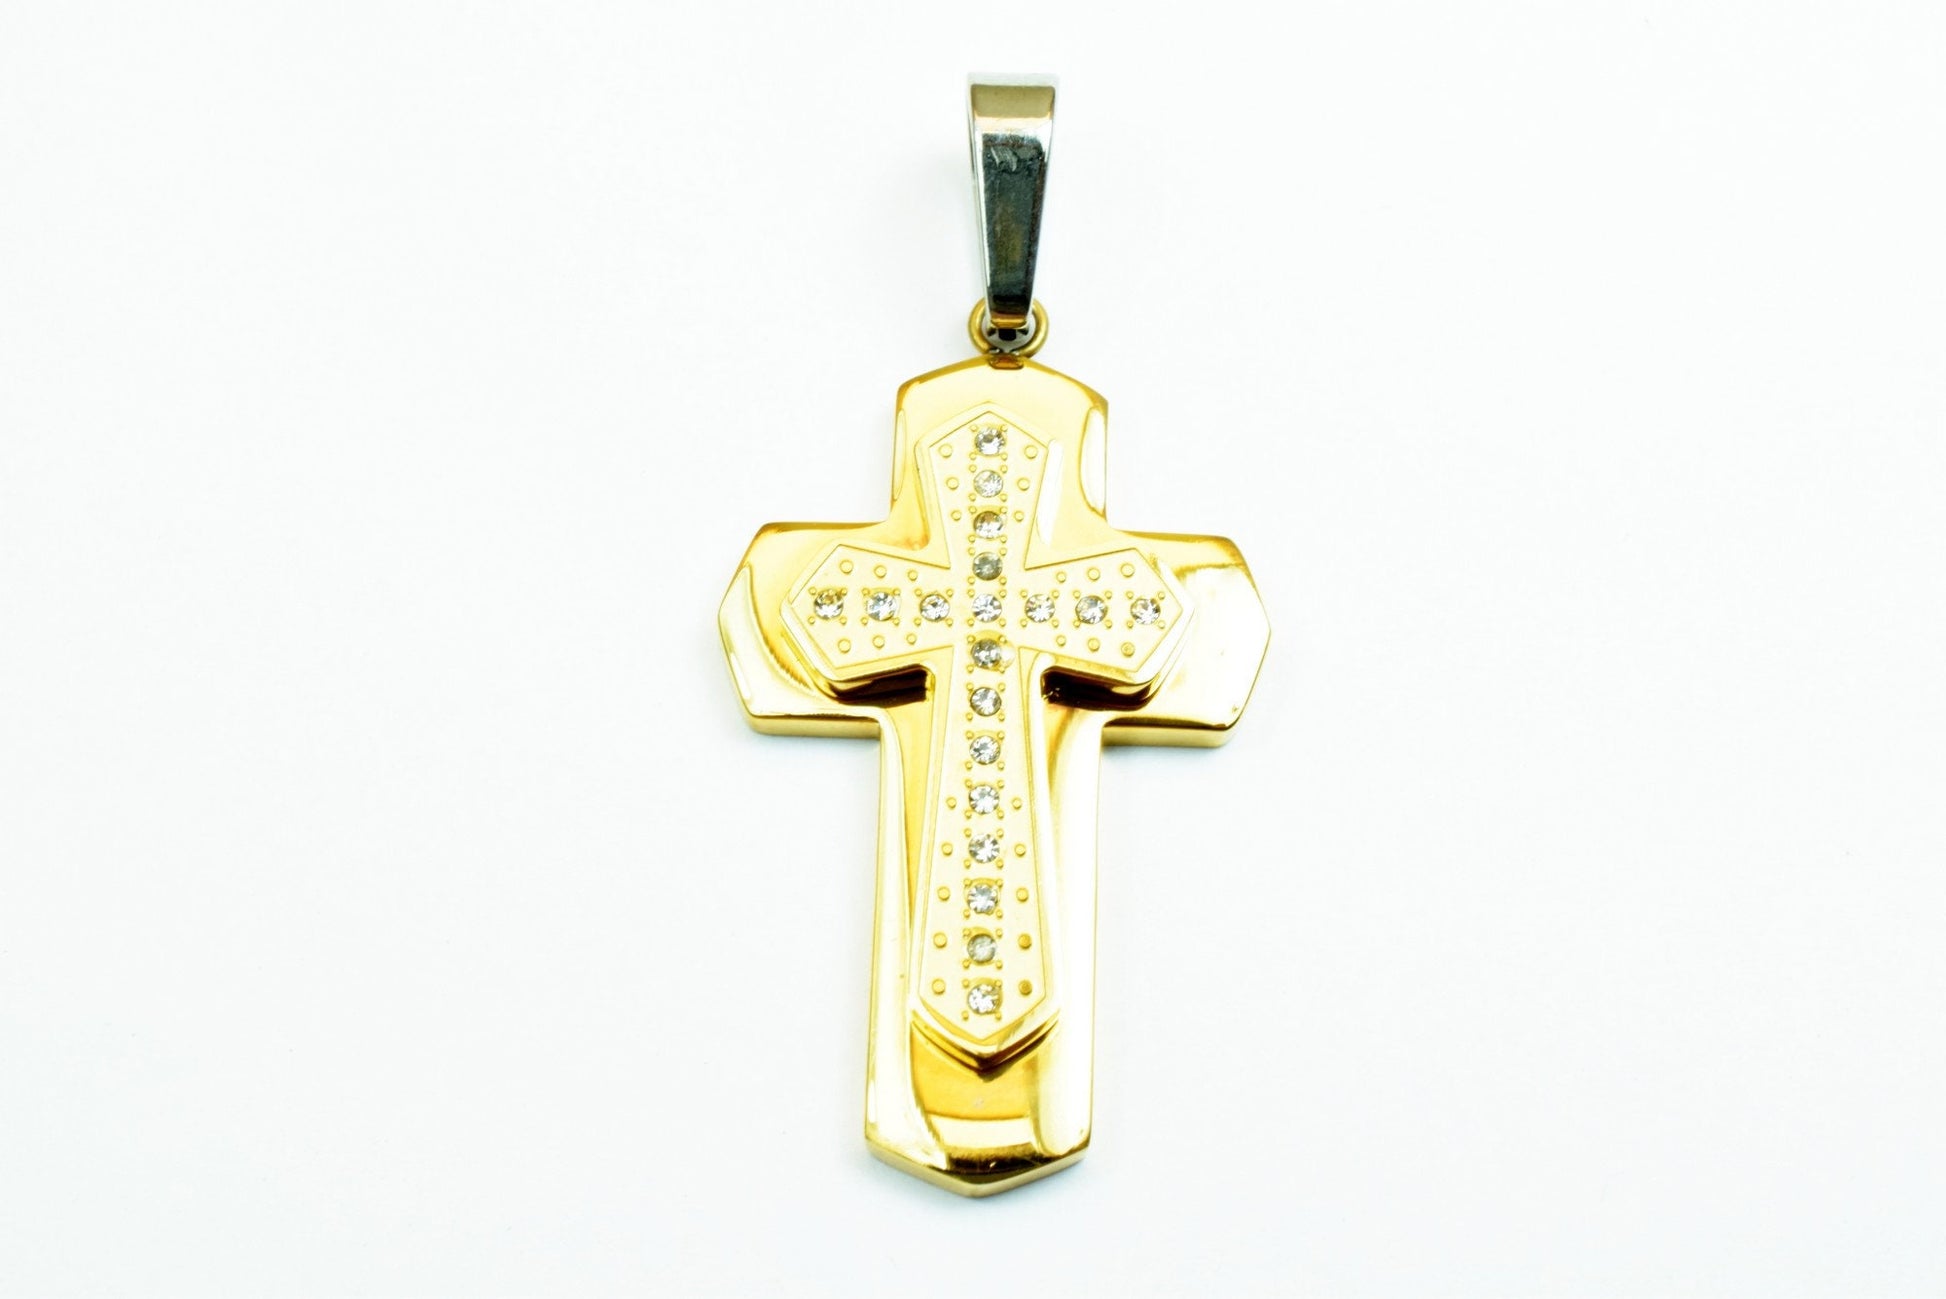 18K Gold Filled Cross Stainless Steel Pendant, CZ Cubic Zirconia Rhinestone Size 43x25mm Christian Religious Rosary or Jewelry Making